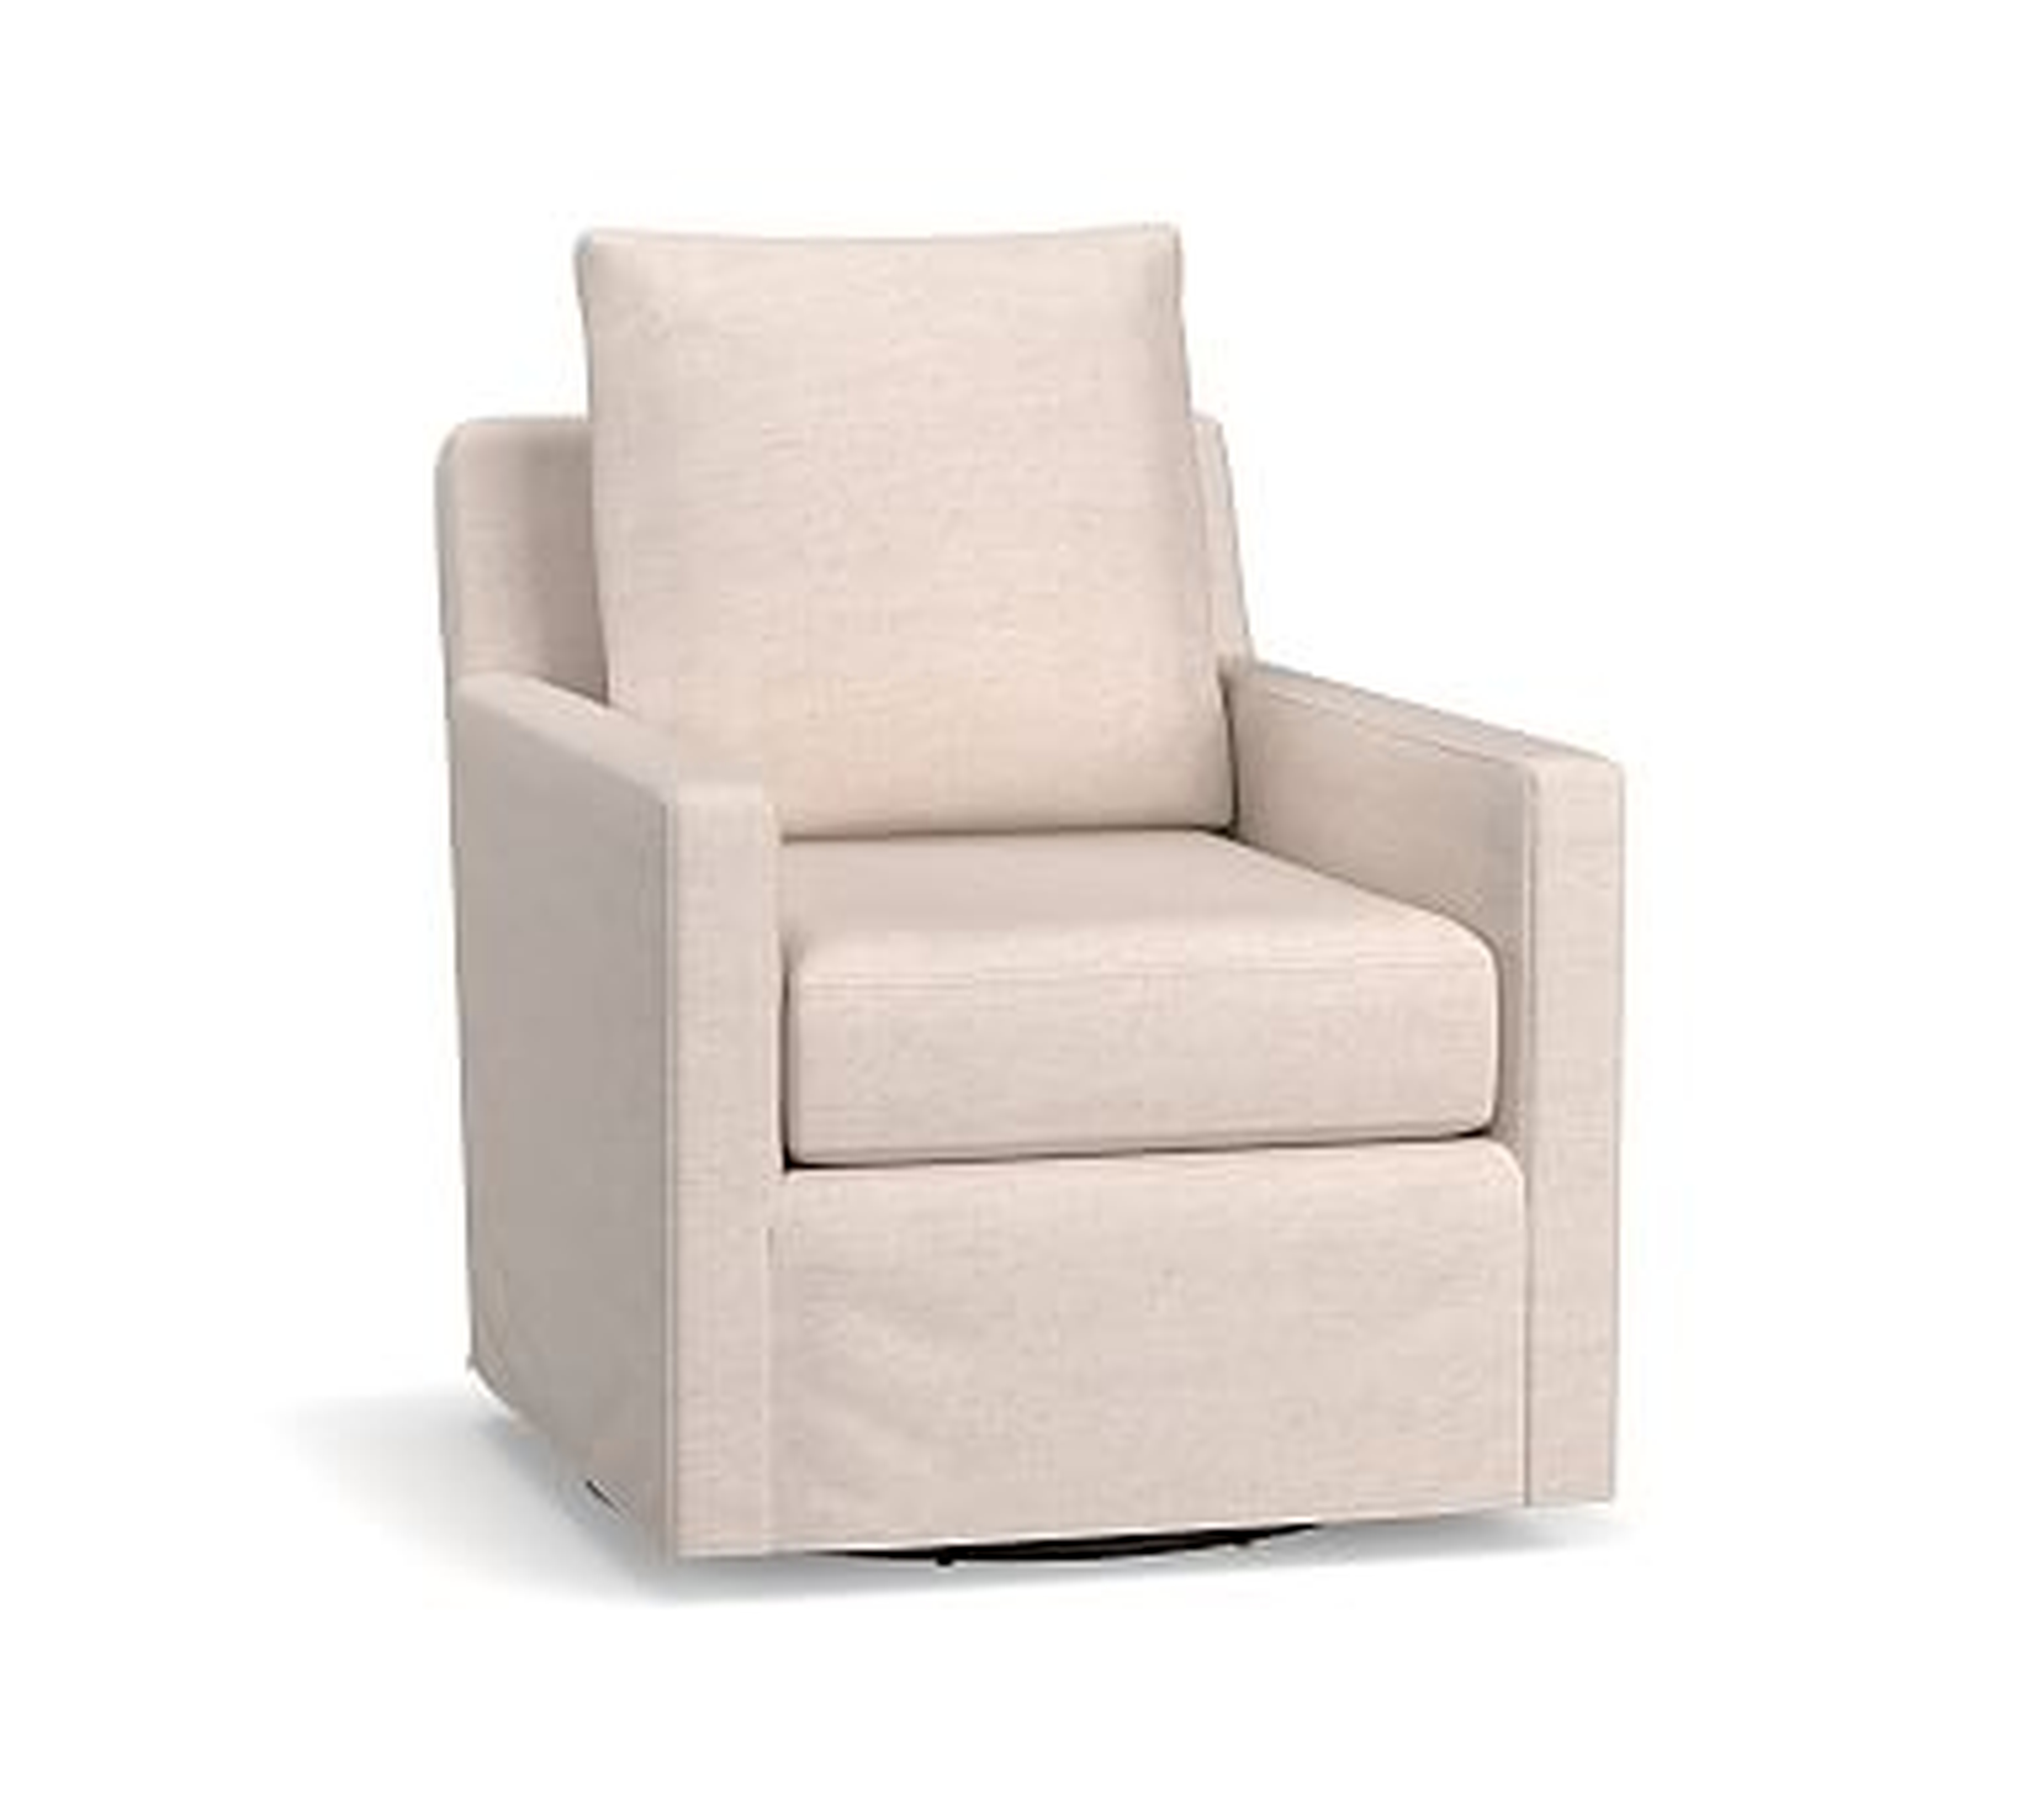 Ayden Slipcovered Swivel Glider, Polyester Wrapped Cushions, Brushed Crossweave Natural - Pottery Barn